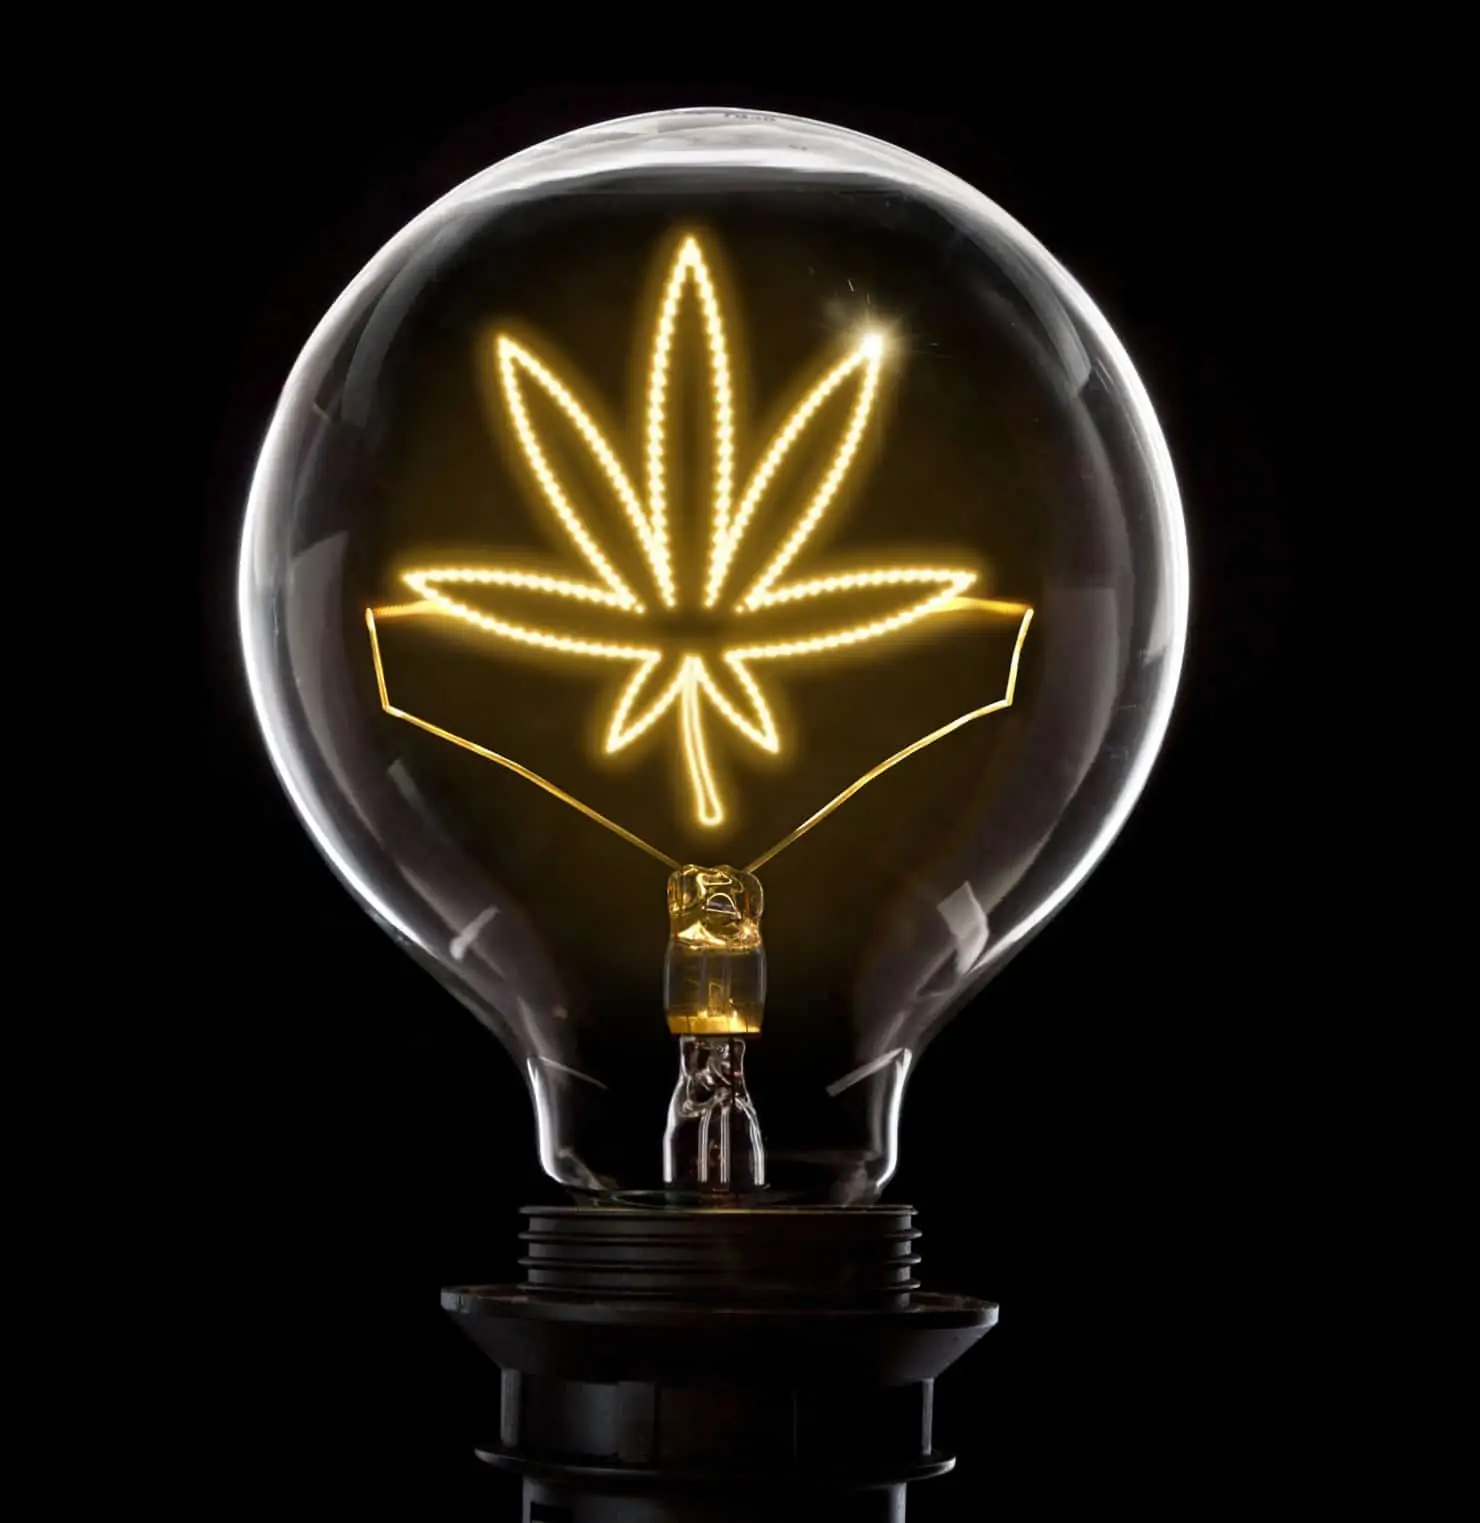 Want to Become A Cannabis Marketing Genius? Here’s How